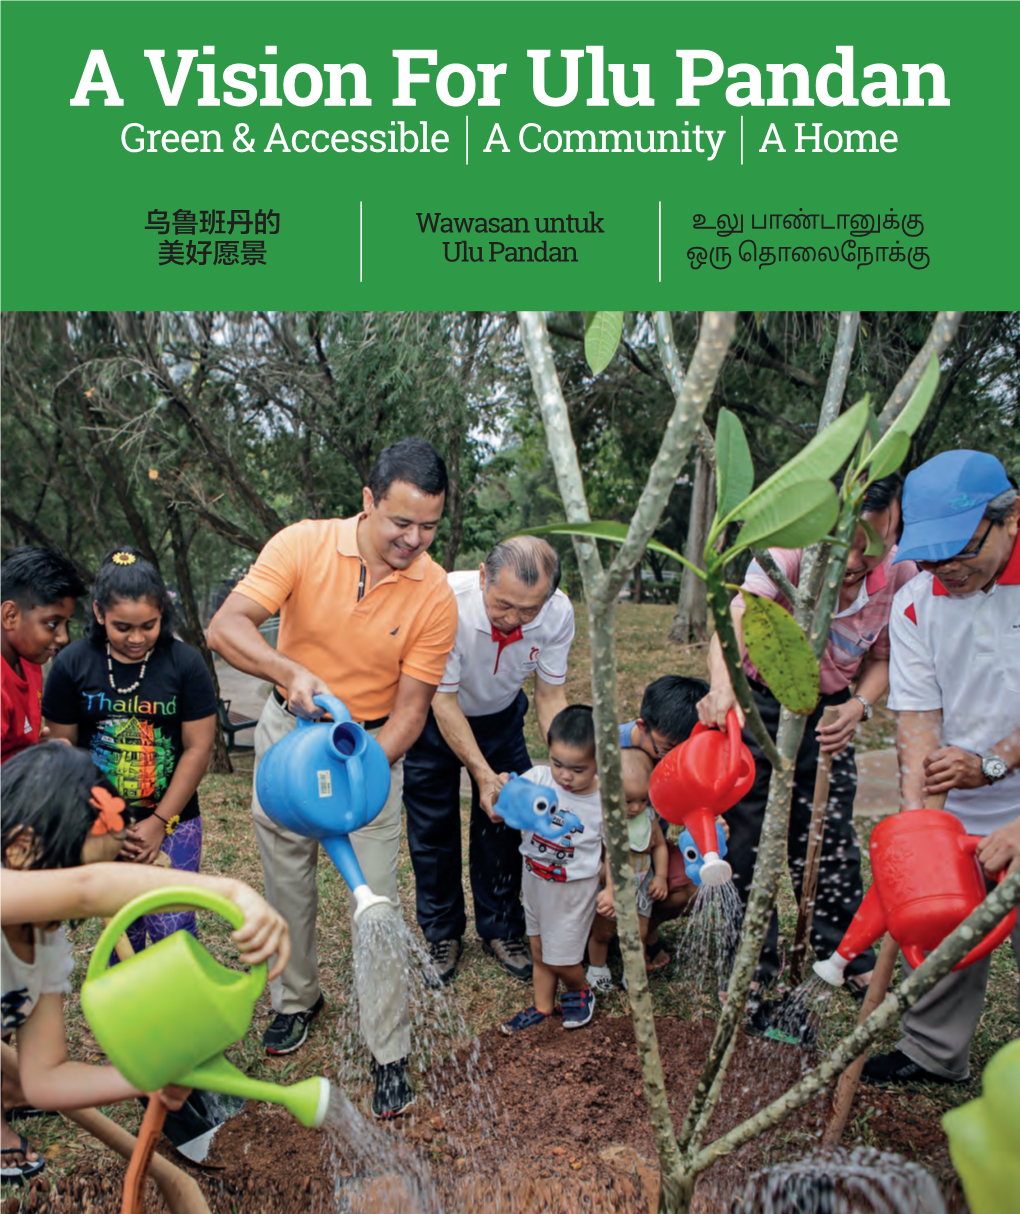 A Vision for Ulu Pandan Green & Accessible a Community a Home